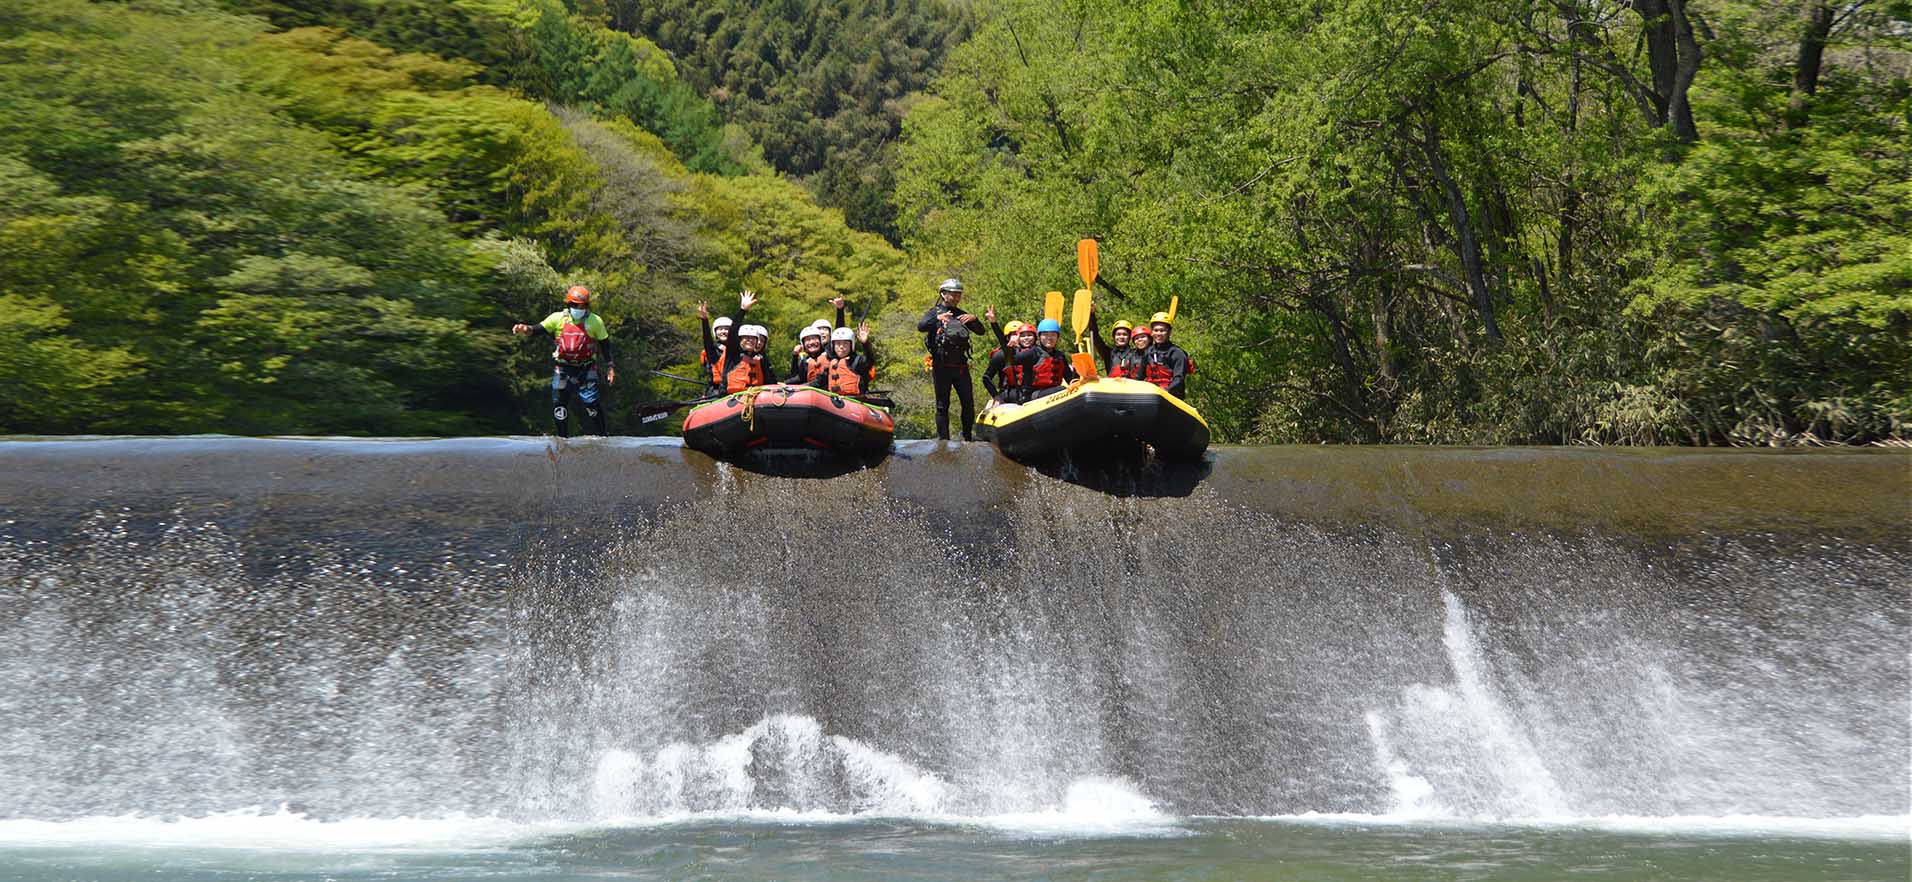 Minakami ful day rafting in tone river with friend and colleague, 友人や同僚と利根川でのみなかみフルデイラフティング